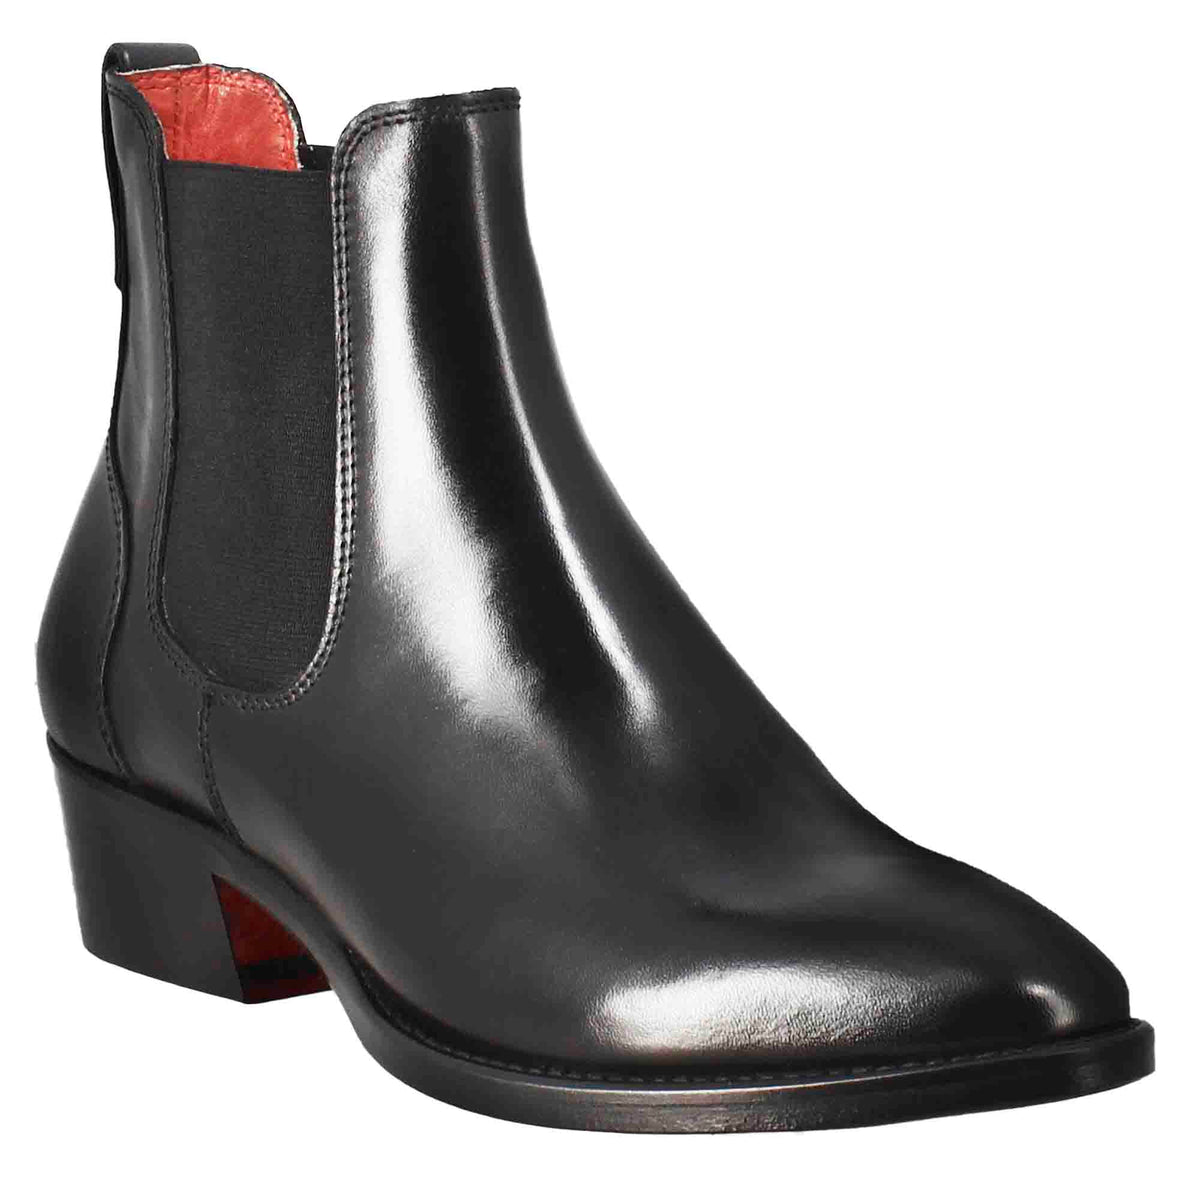 Women's smooth Chelsea boot with medium heel in black leather